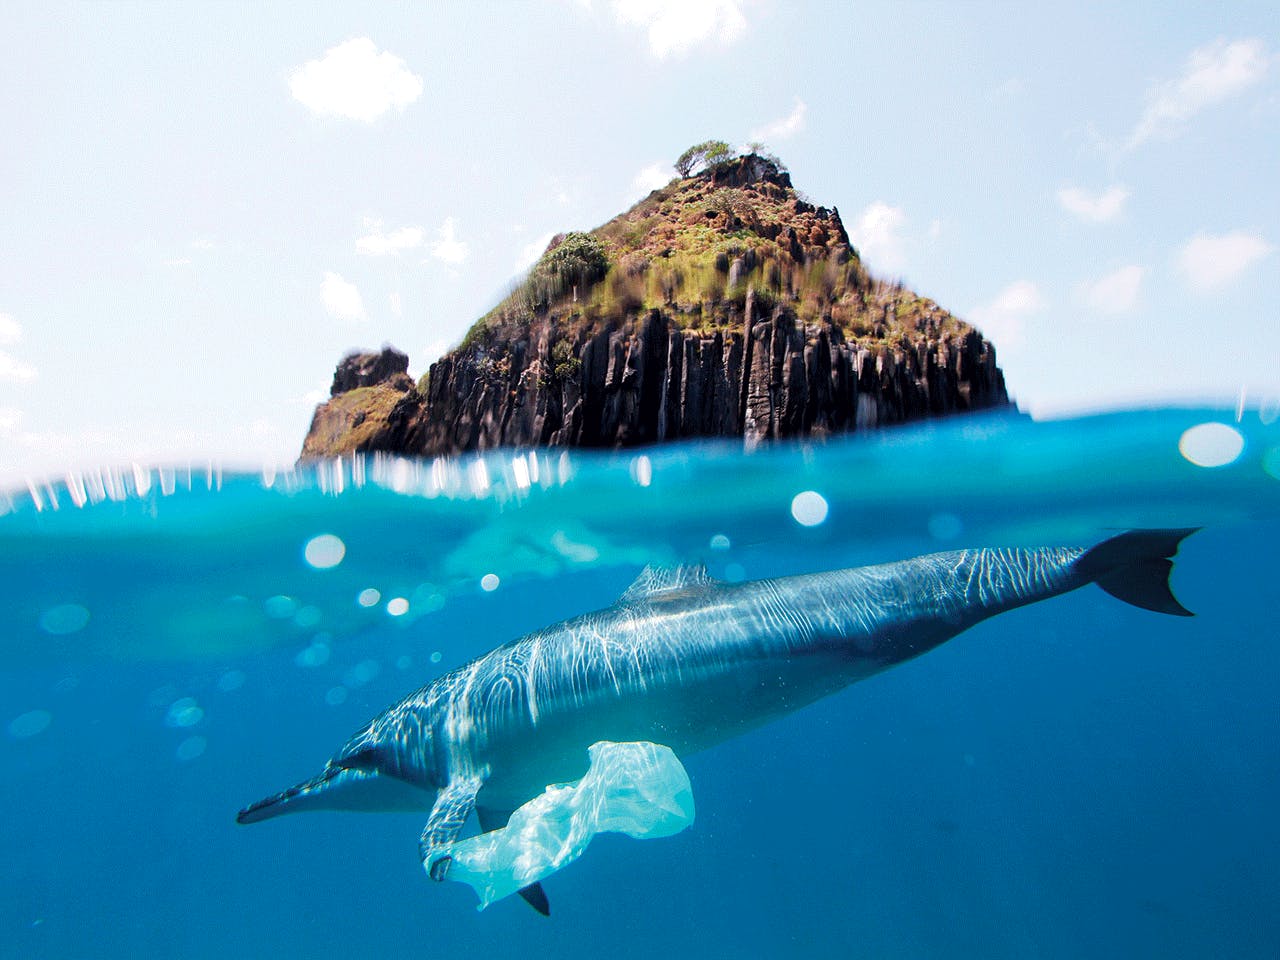 A DOLPHIN IS ENTANGLED WITH A PLASTIC BAG
OFF THE COAST OF BRAZIL.